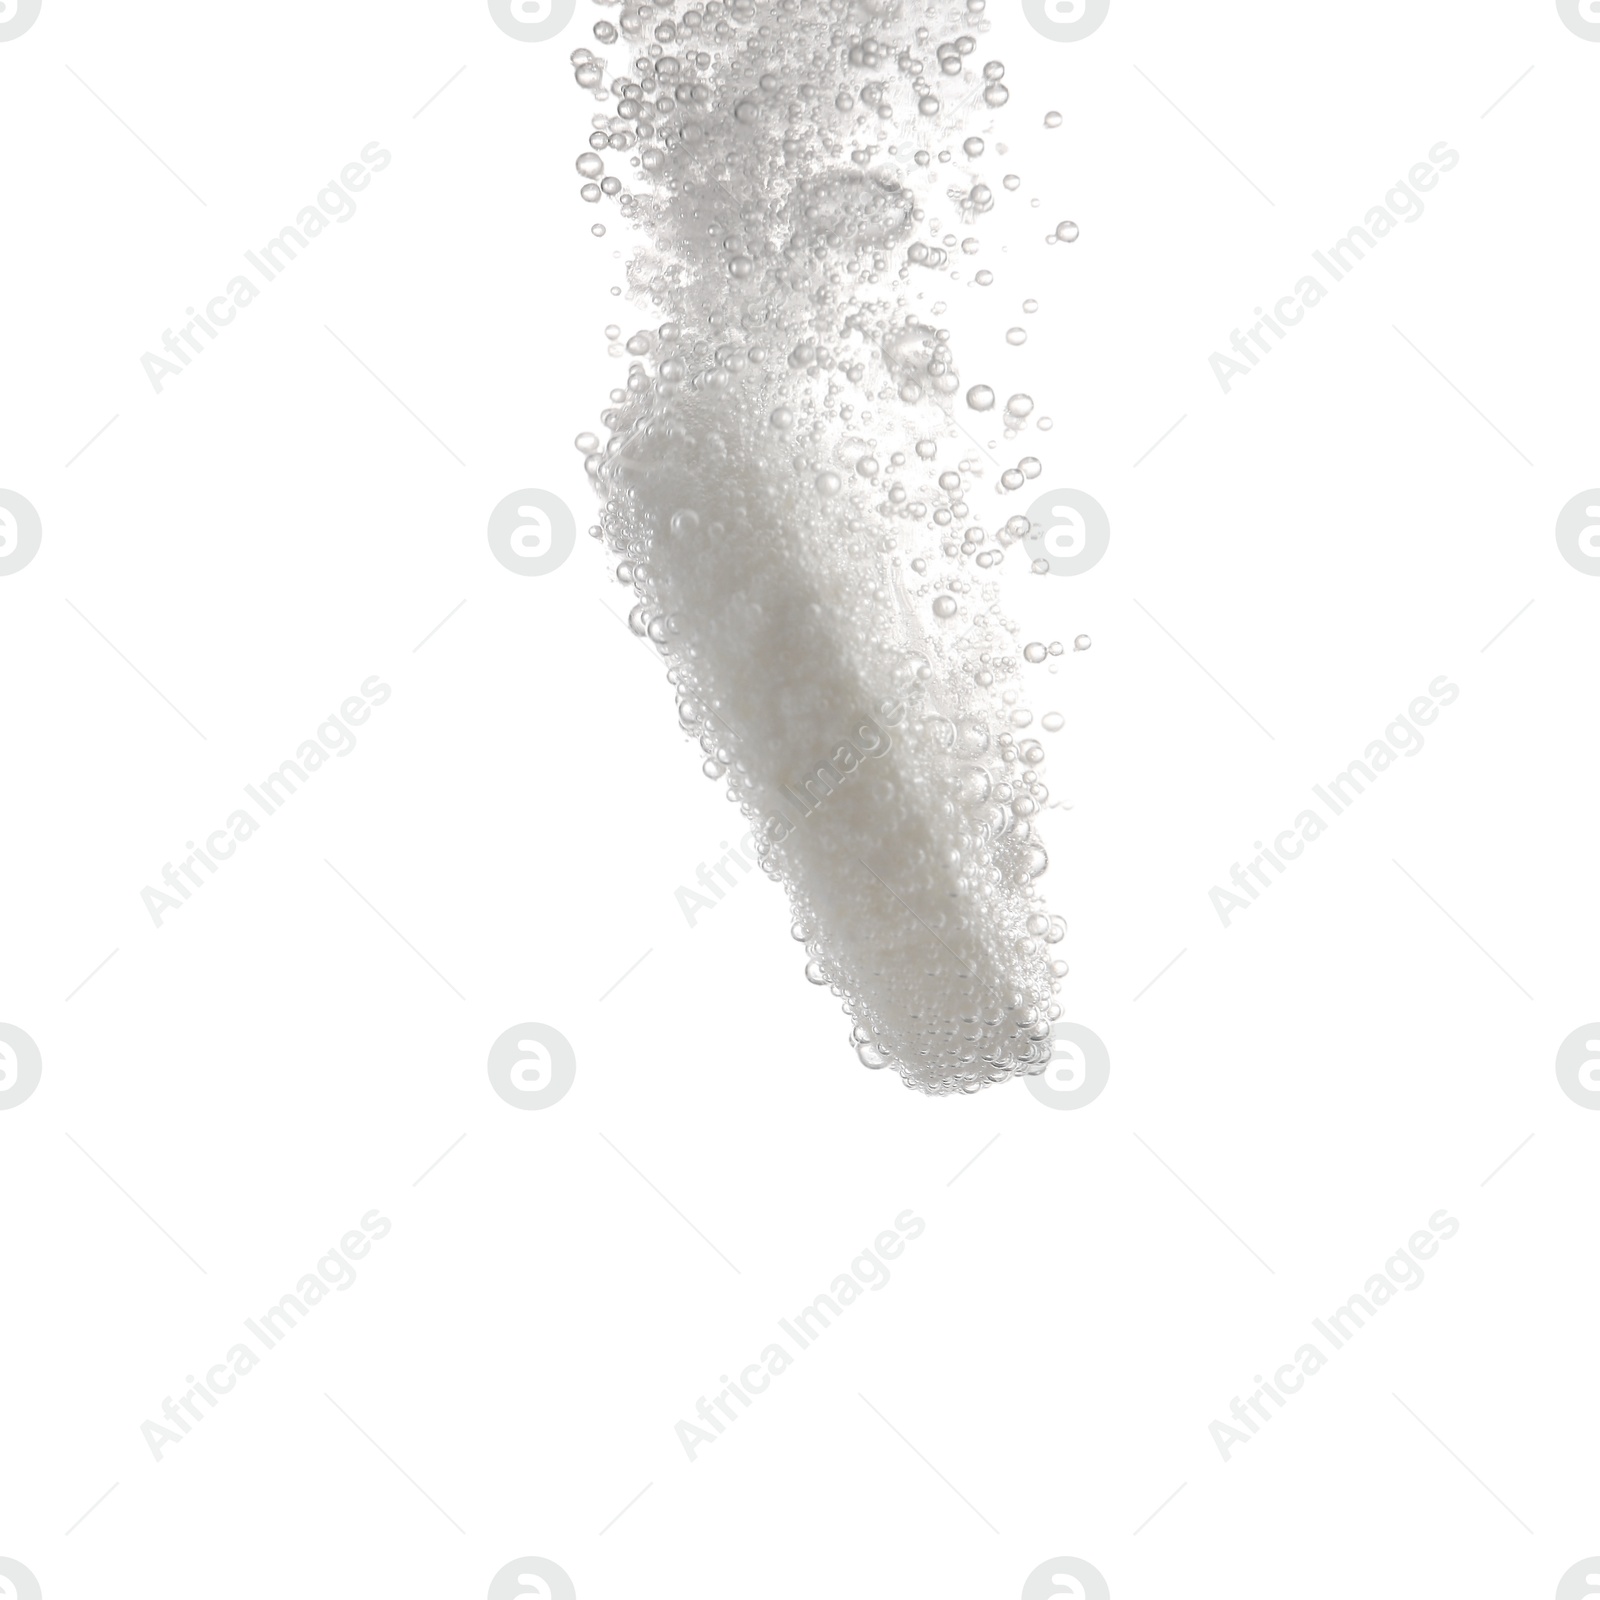 Photo of Effervescent pill dissolving in water on white background, closeup